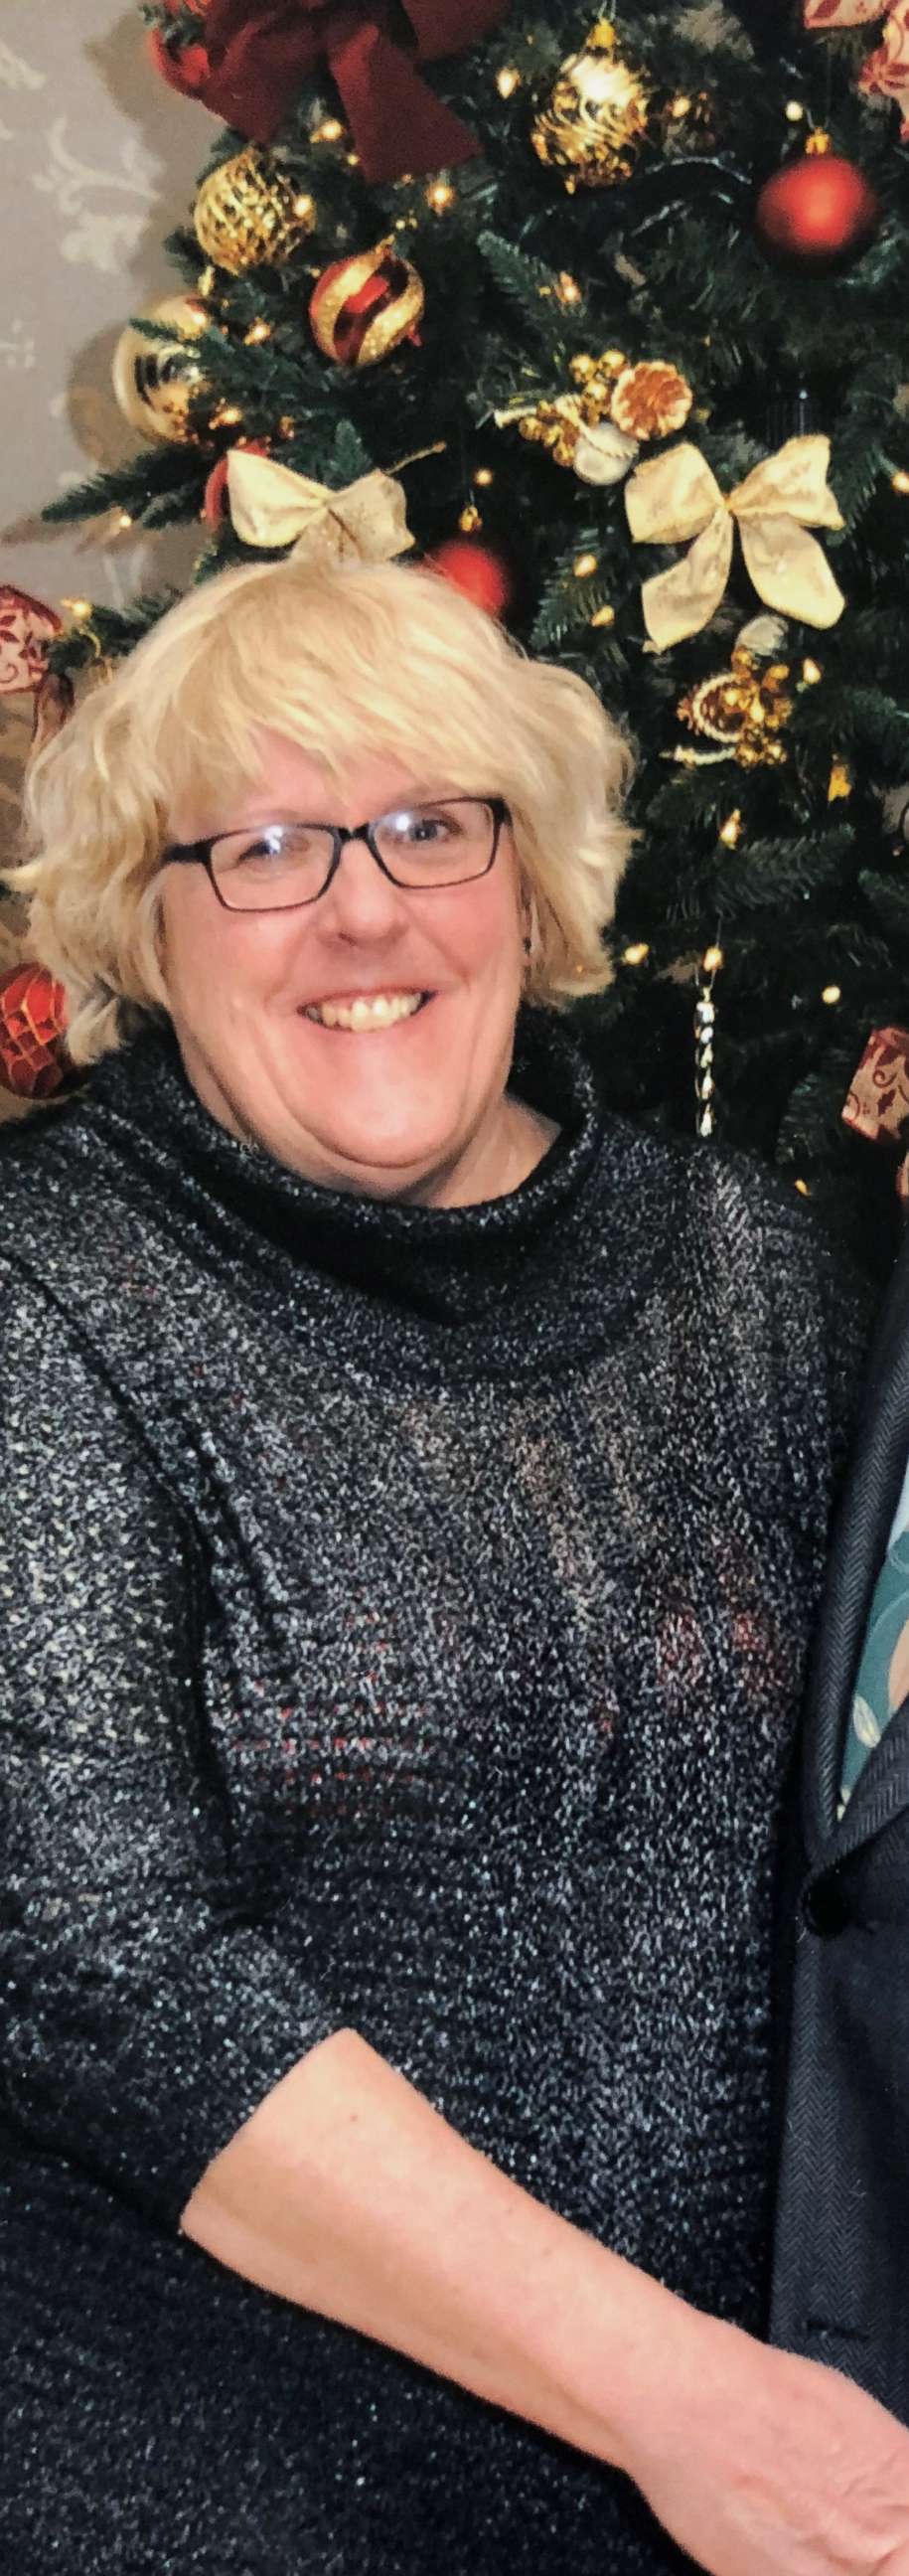 PHOTO: Registered nurse Barbara Birchenough, 65, who worked at Clara Maass Medical Center in Belleville, N.J., died of complications of COVID-19.